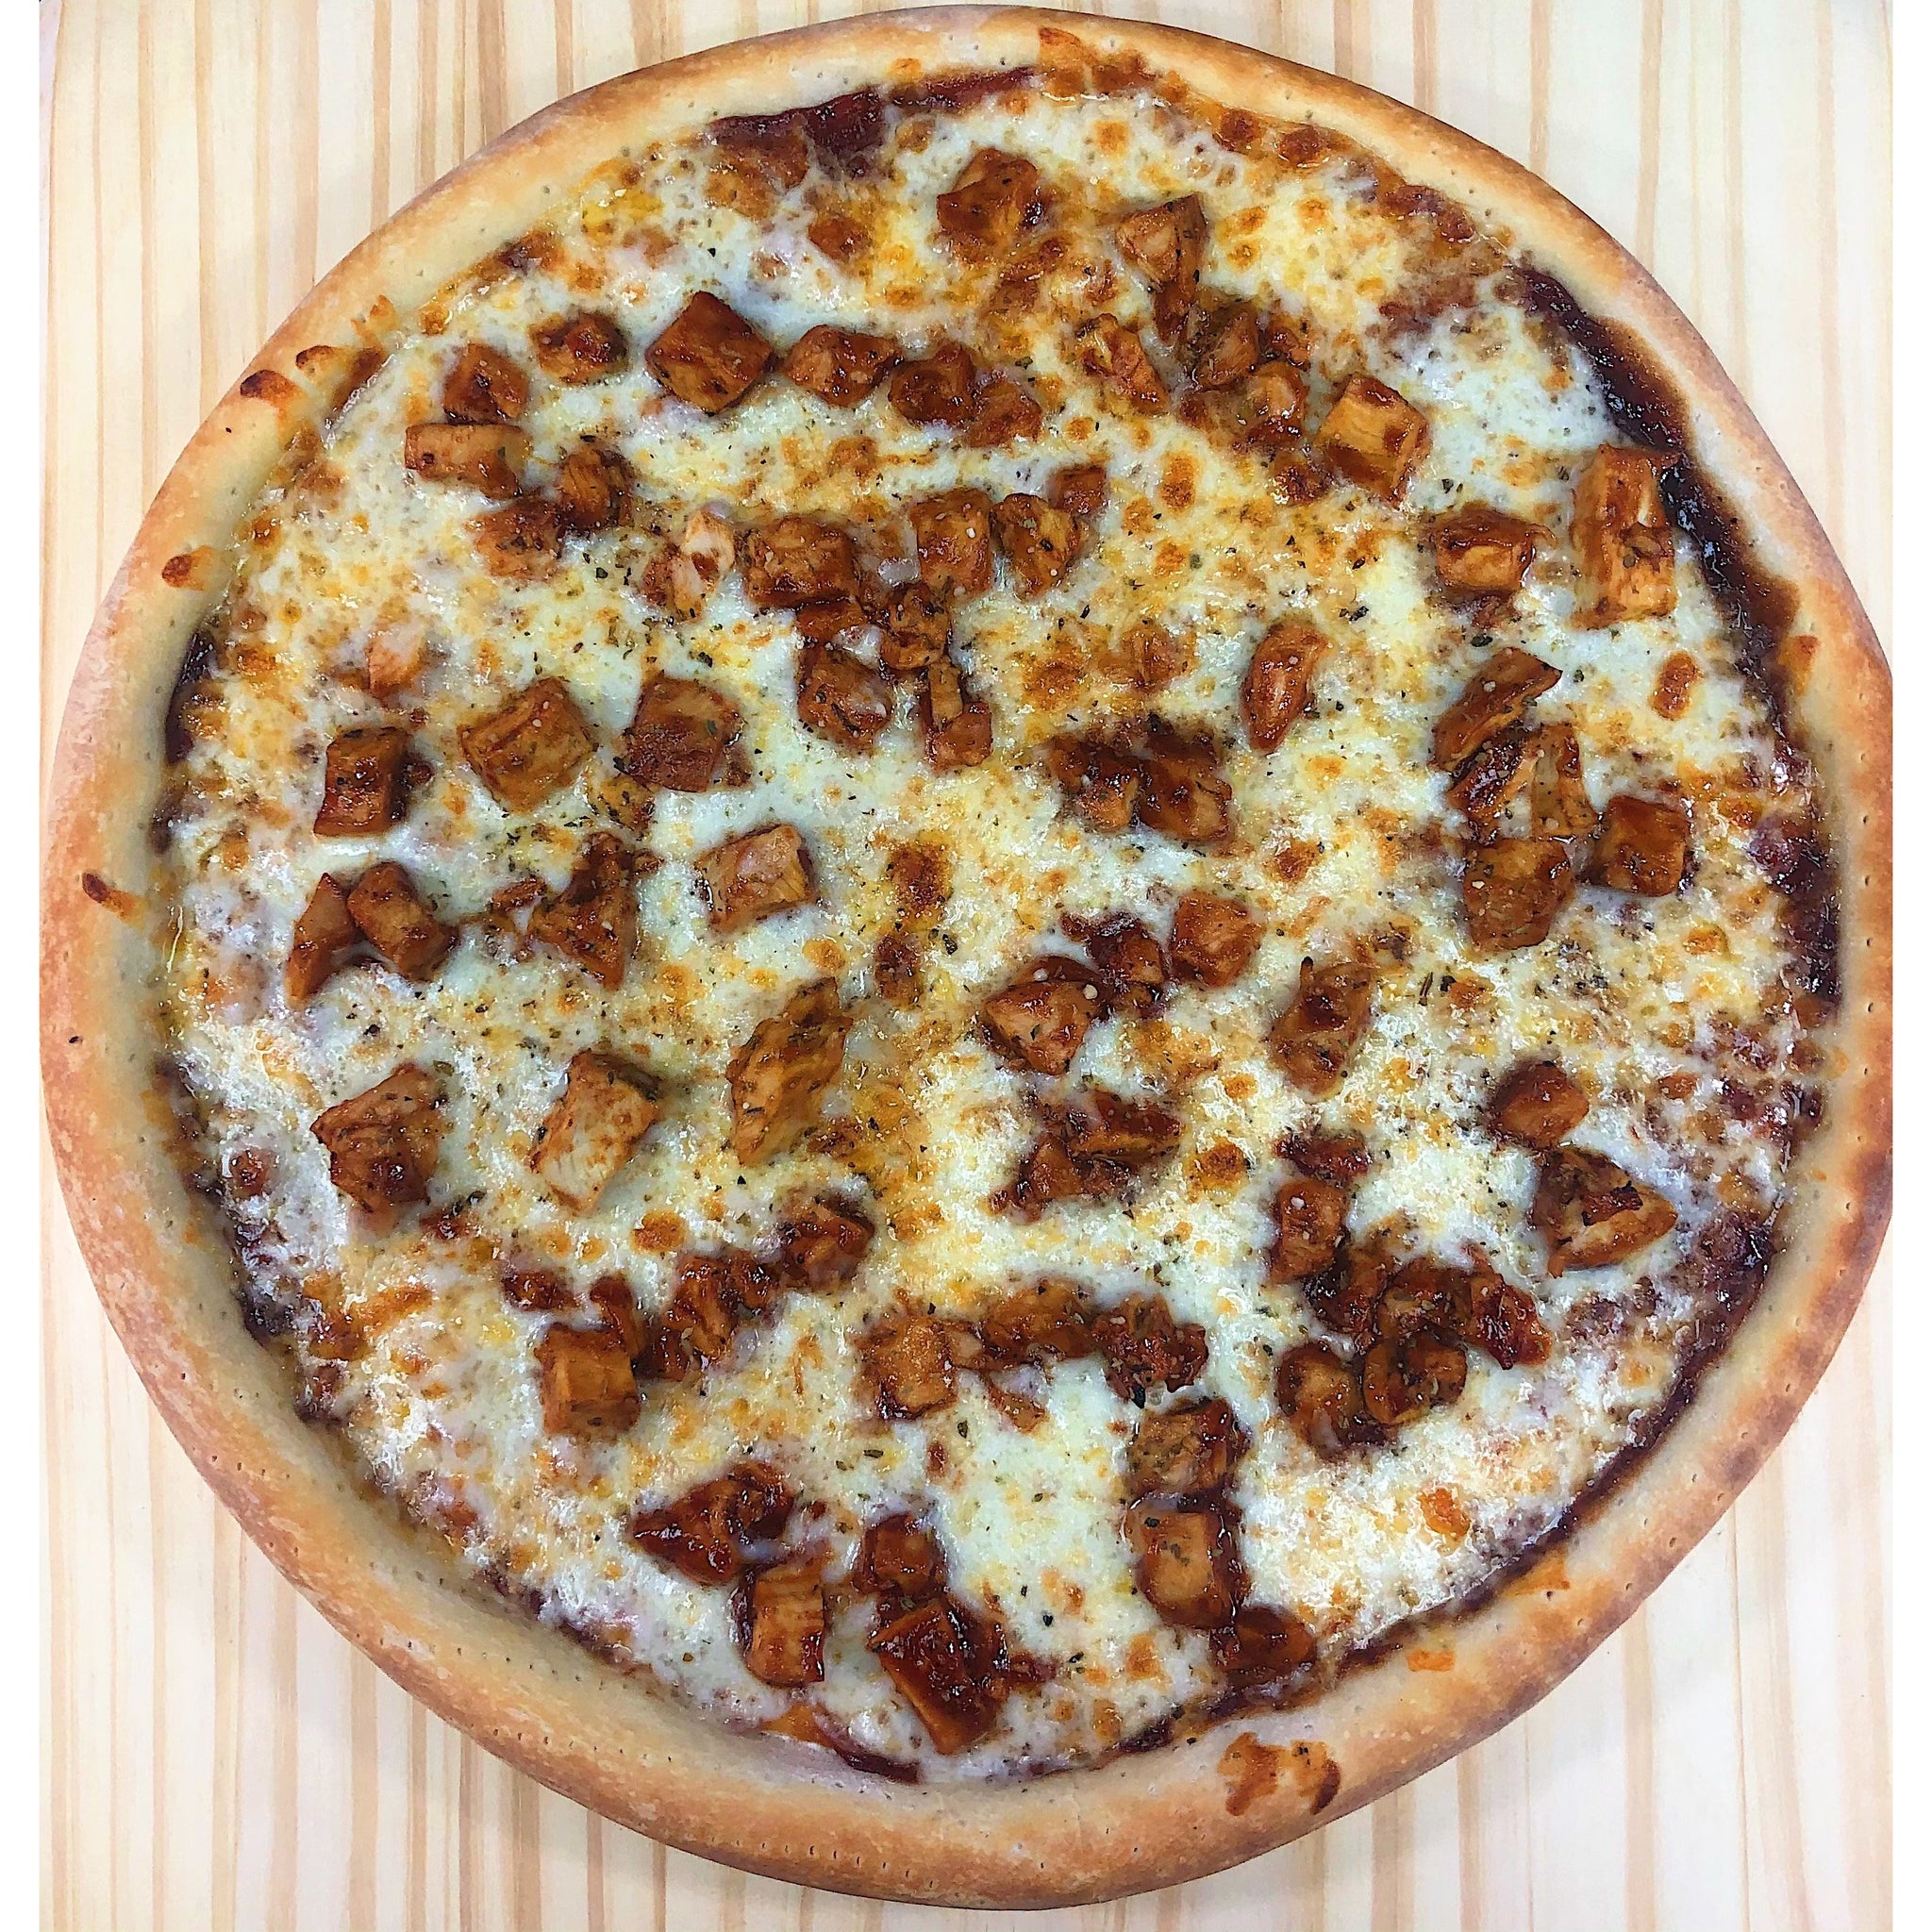 An image of a BBQ Chicken Pizza. The pizza features a thin and crispy crust topped with tangy barbecue sauce. It is generously layered with grilled chicken pieces, melted cheese, sliced red onions, and fresh cilantro. The pizza is baked to perfection, with a golden-brown crust and bubbly cheese.